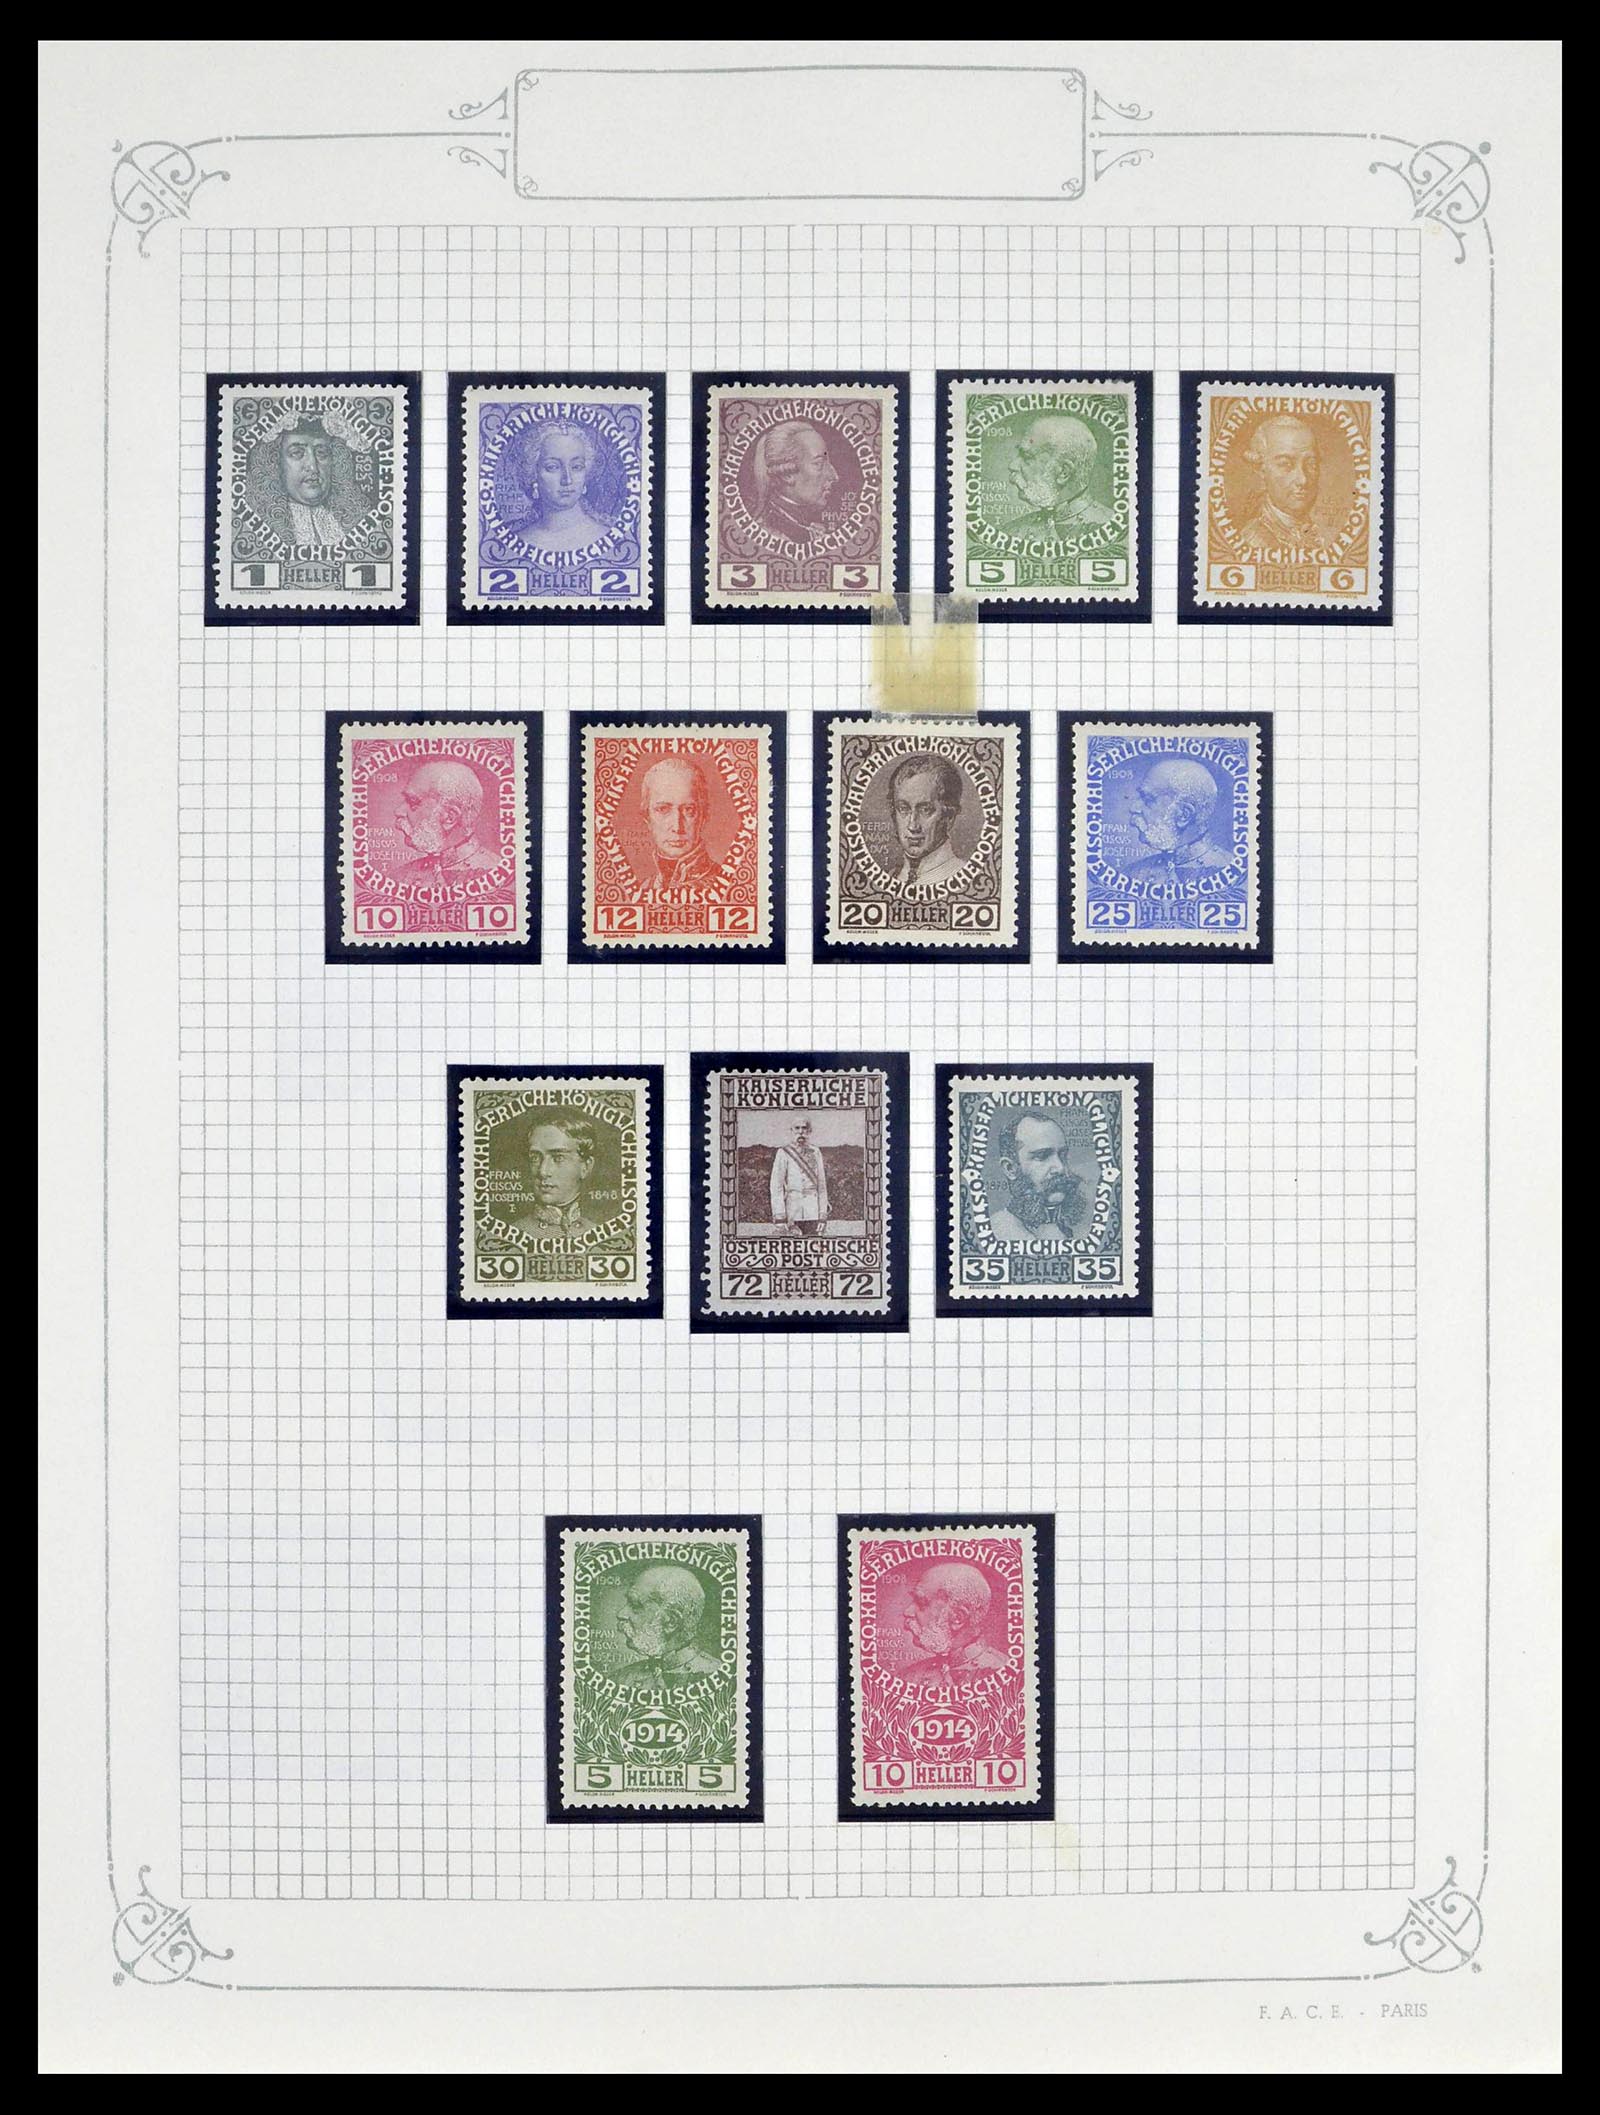 39276 0013 - Stamp collection 39276 Austria and territories 1850-1979.